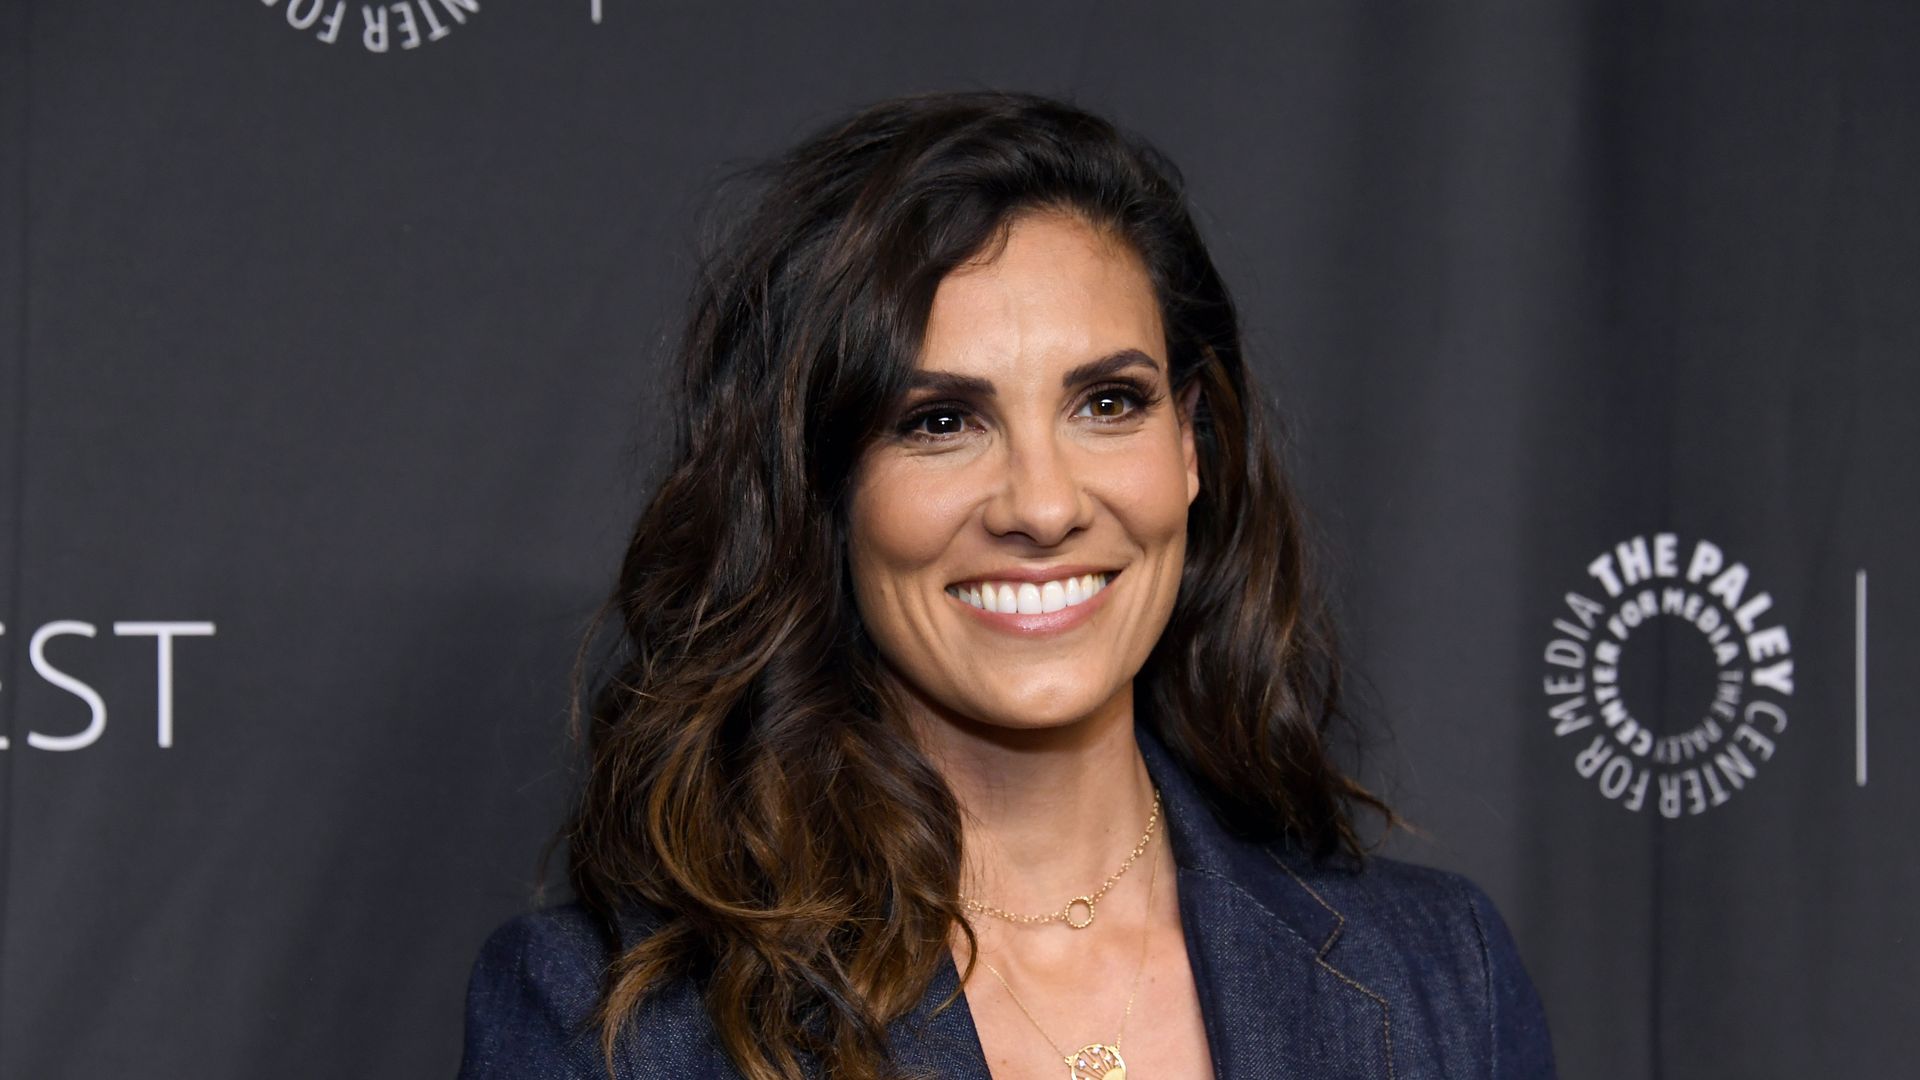 Daniela Ruah attends a salute to the NCIS universe celebrating "NCIS" "NCIS: Los Angeles" and "NCIS: Hawai'i" during the 39th Annual PaleyFest LA at Dolby Theatre on April 10, 2022 in Hollywood, California